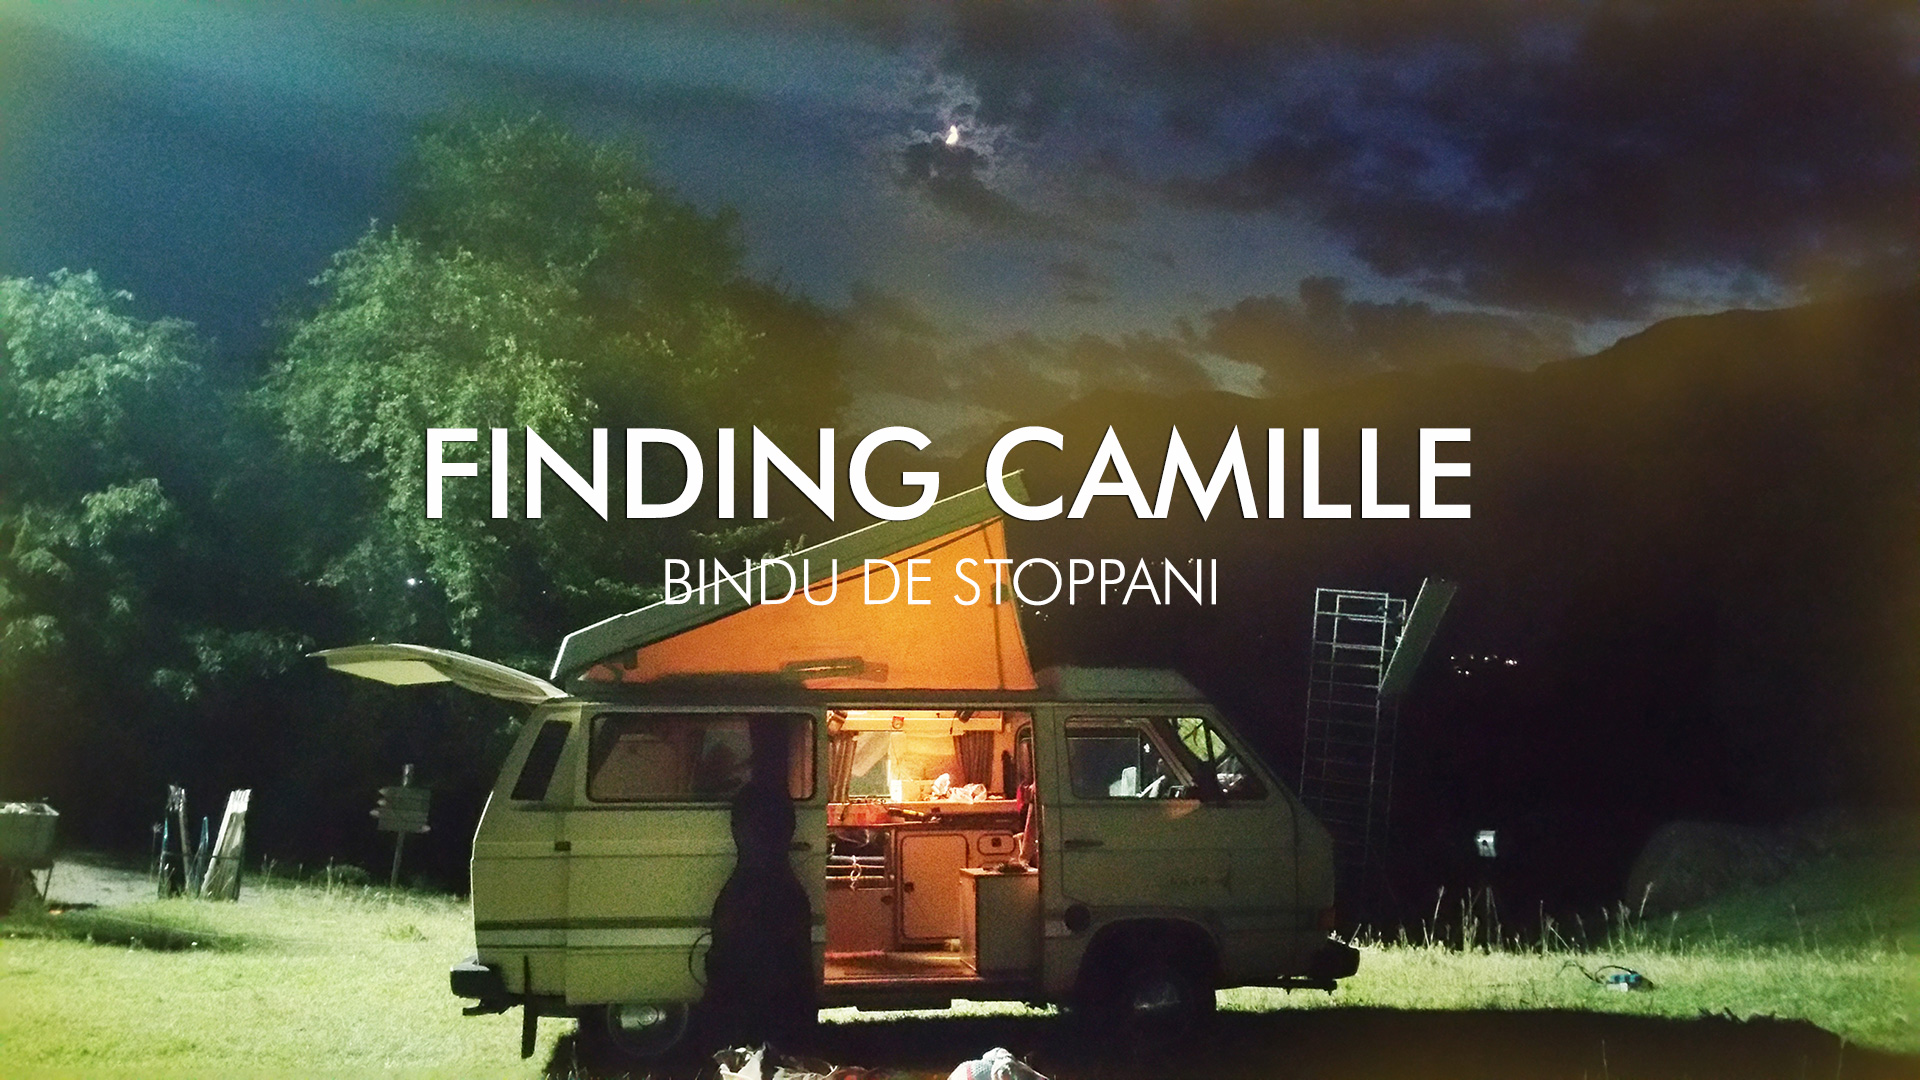 “FINDING CAMILLE”